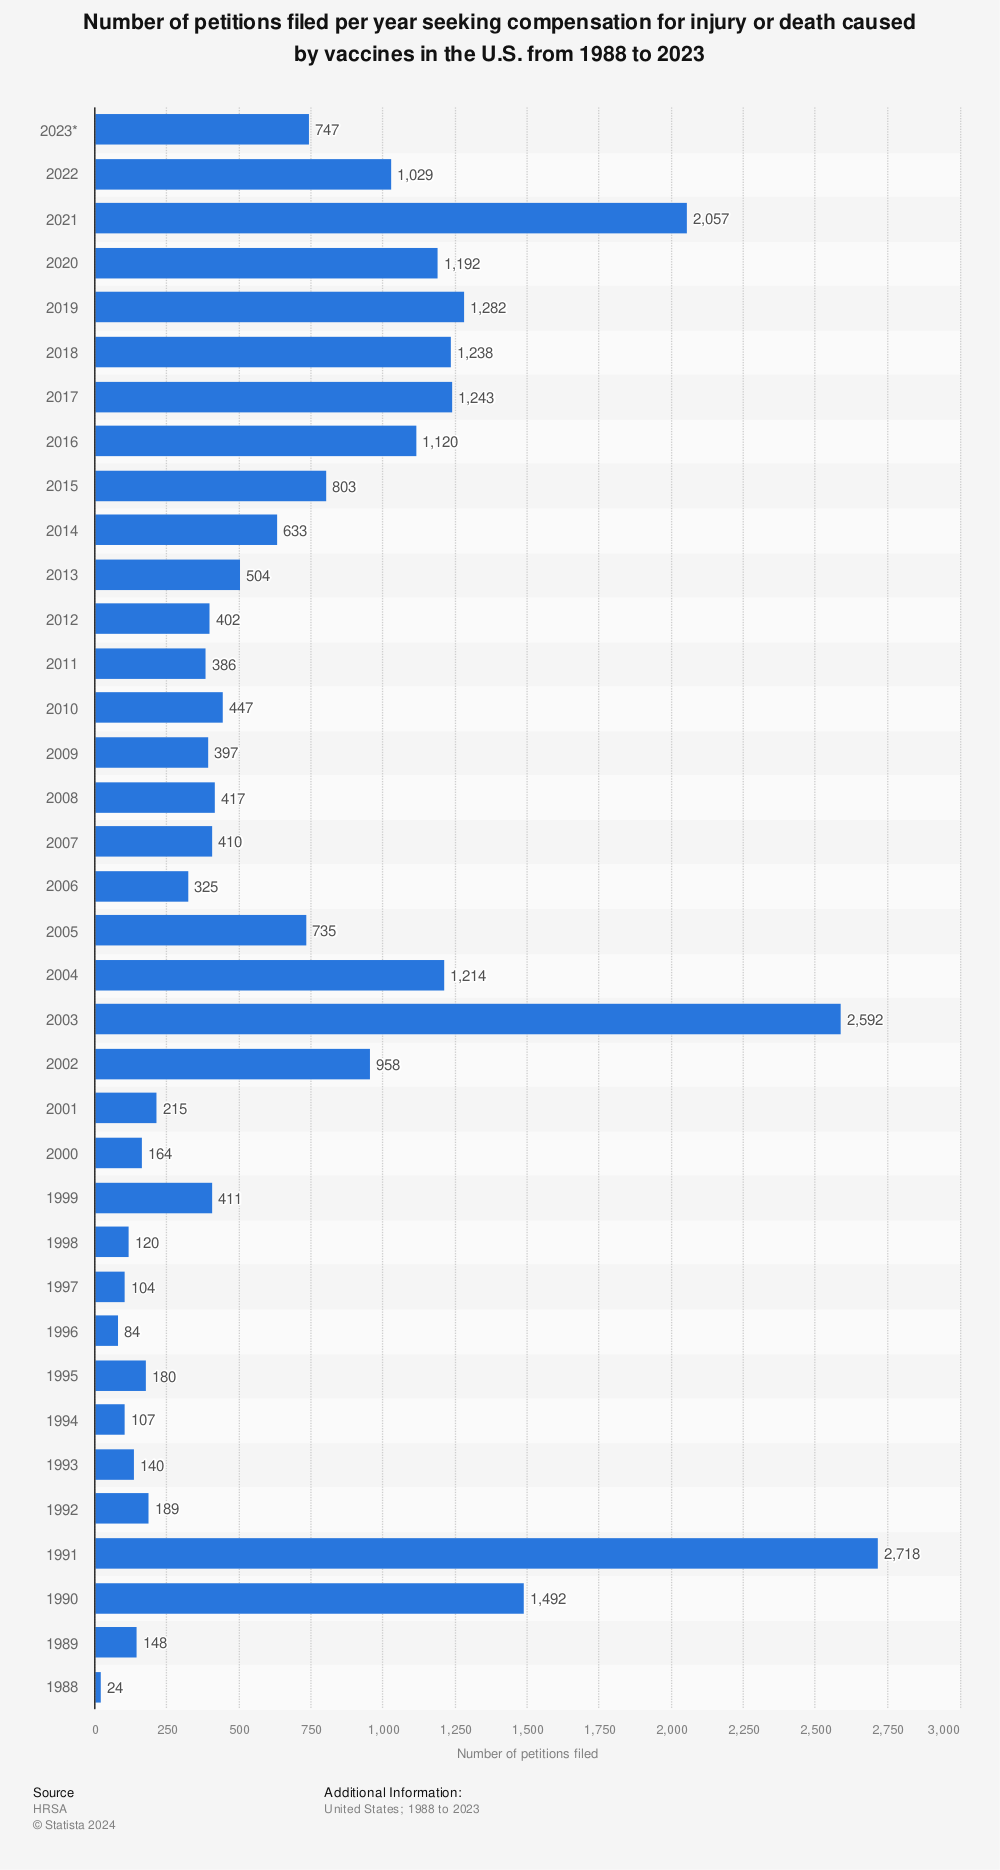 Statistic: Number of petitions filed per year seeking compensation for injury or death caused by vaccines in the U.S. from 1988 to 2022 | Statista